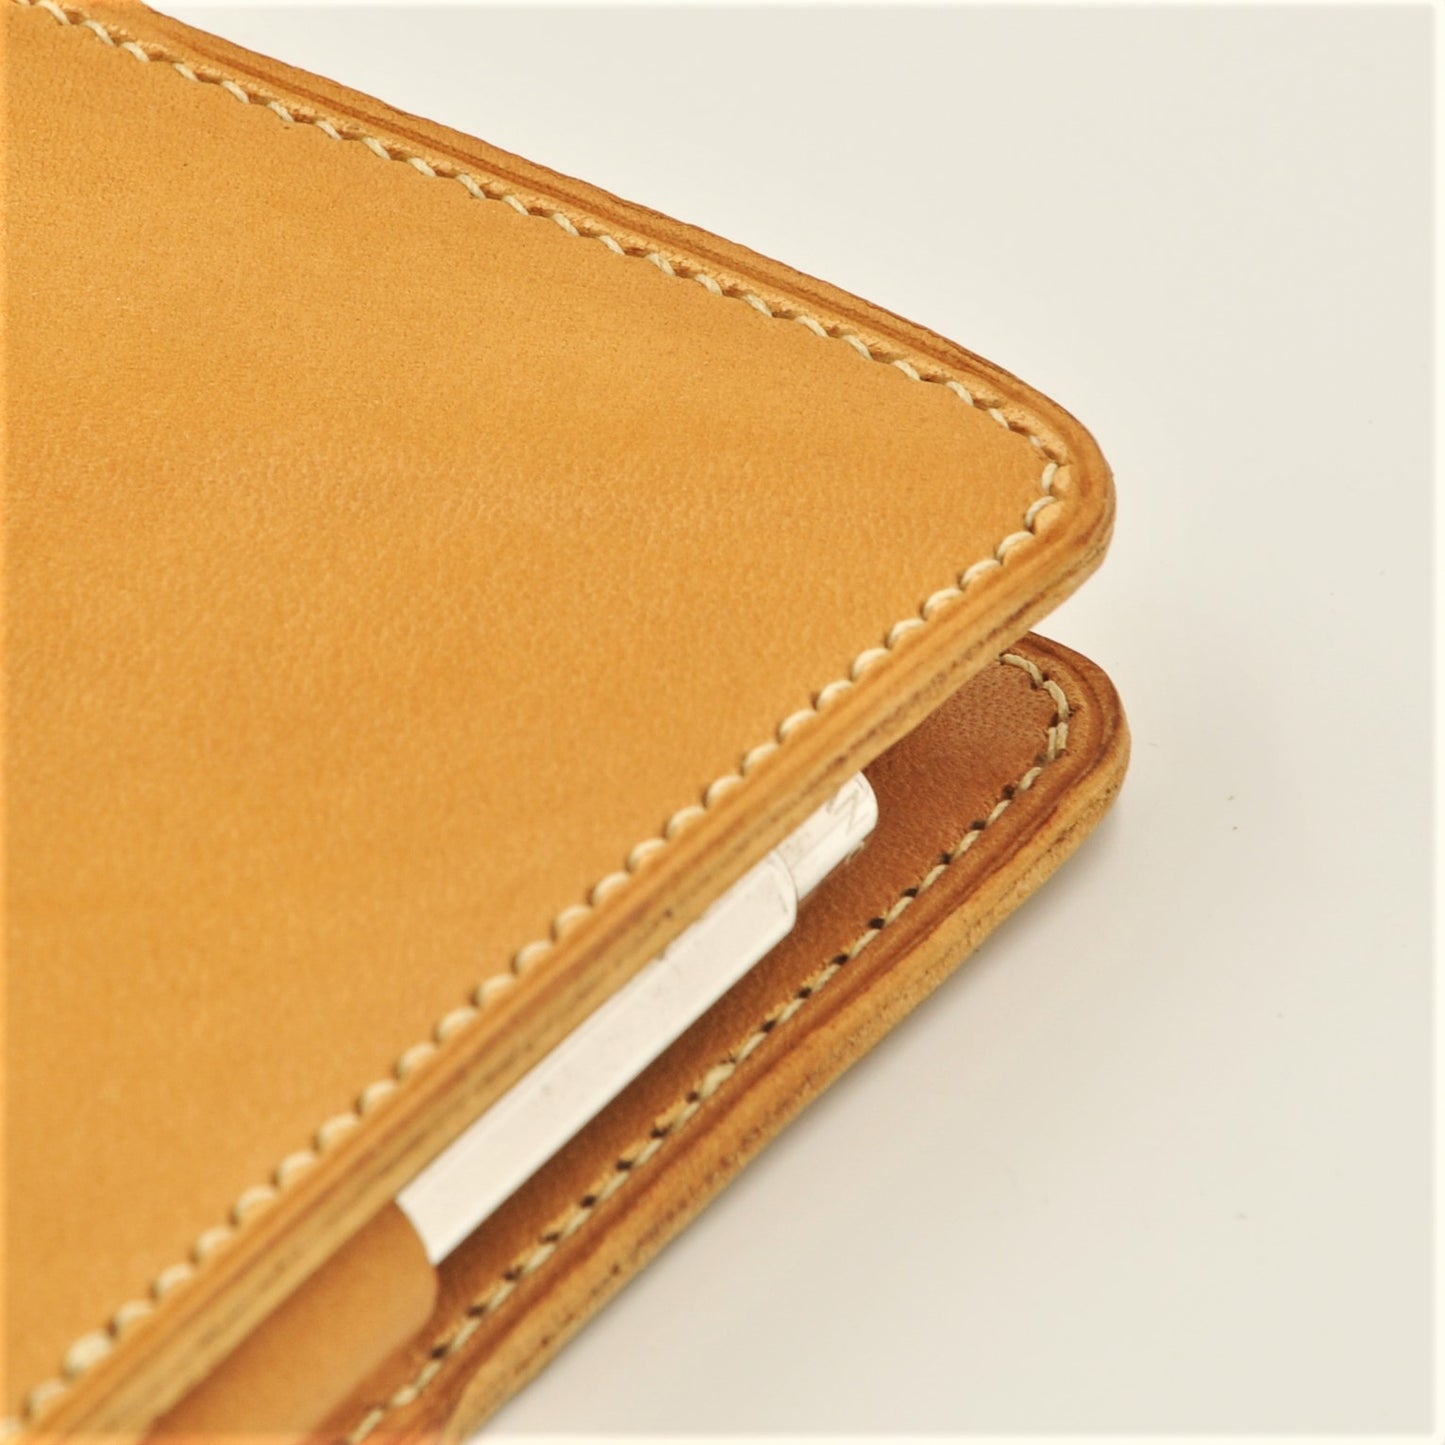 ROHE A6-P Premium Leather Notebook Sleeve